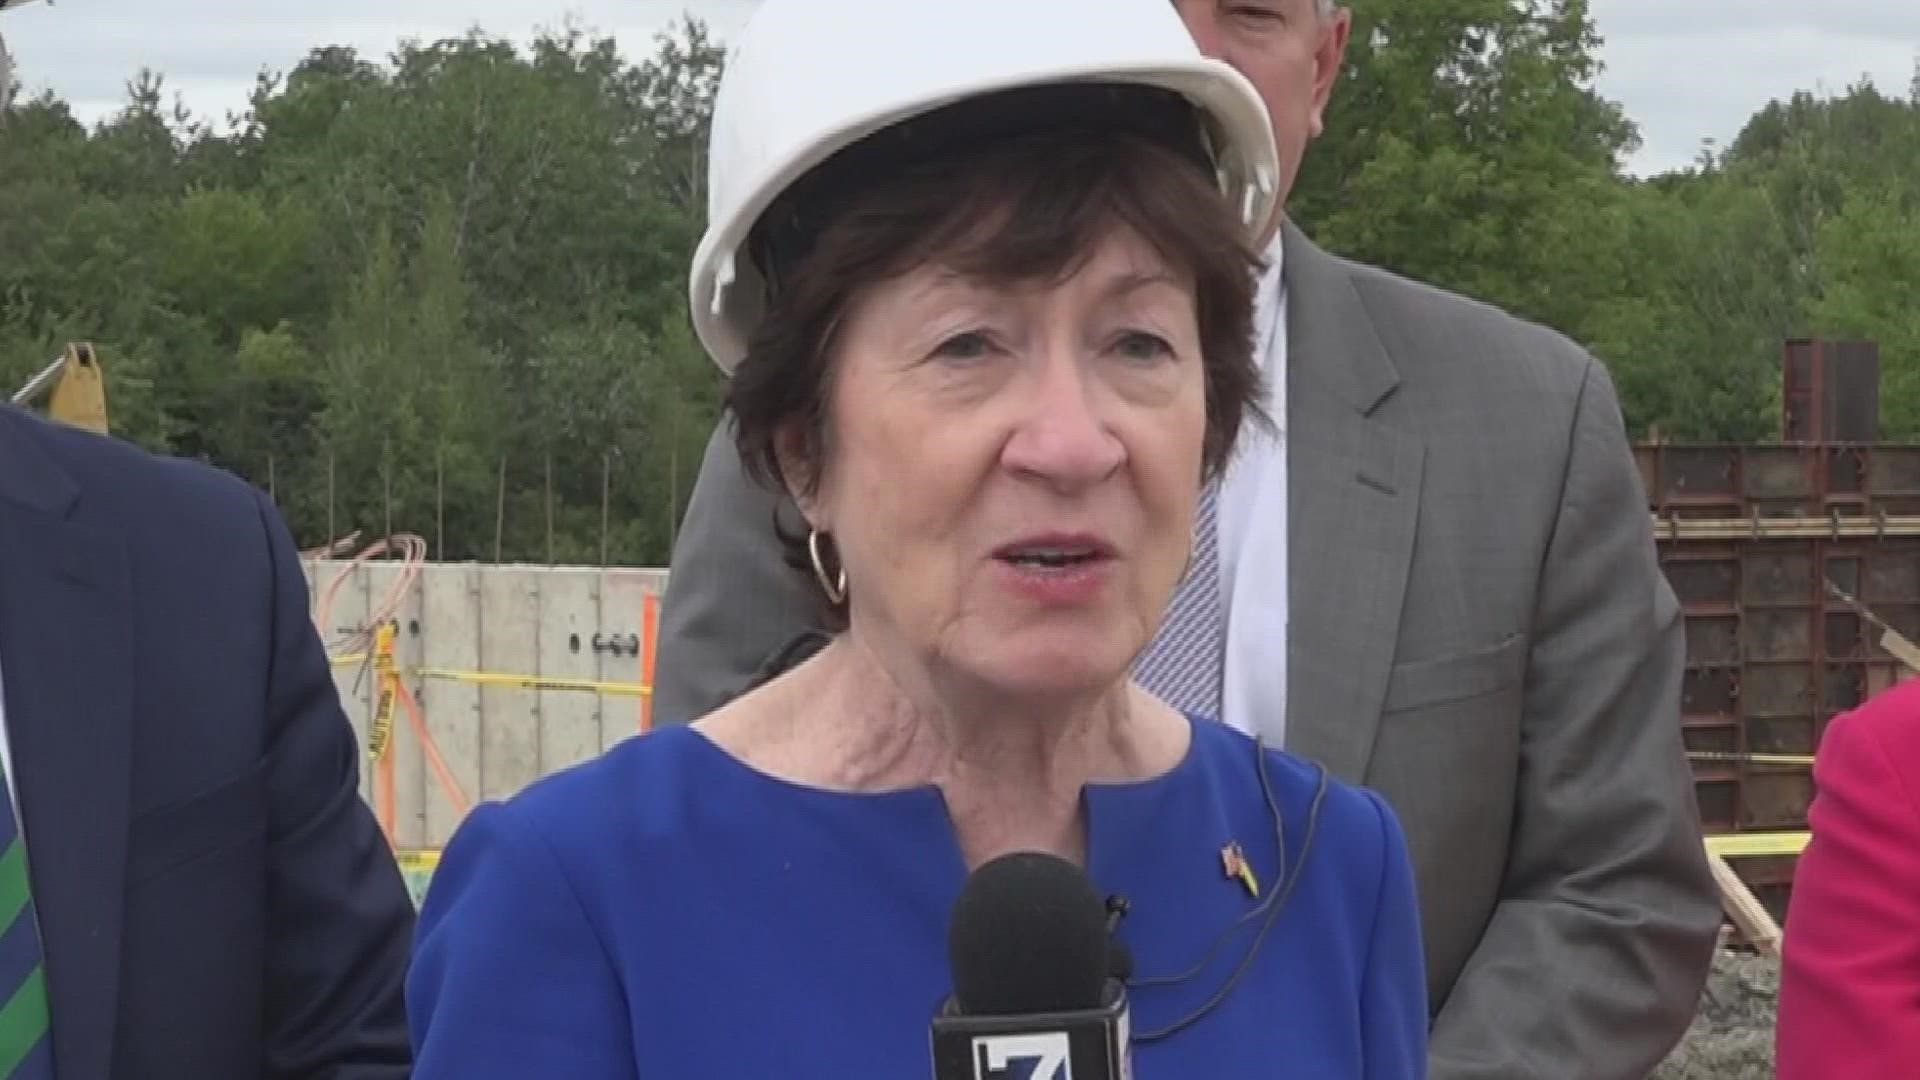 The senator visited Eastern Maine Medical Center and Acadia Hospital on Wednesday as she works to invest nearly $3.2 million in the facilities.